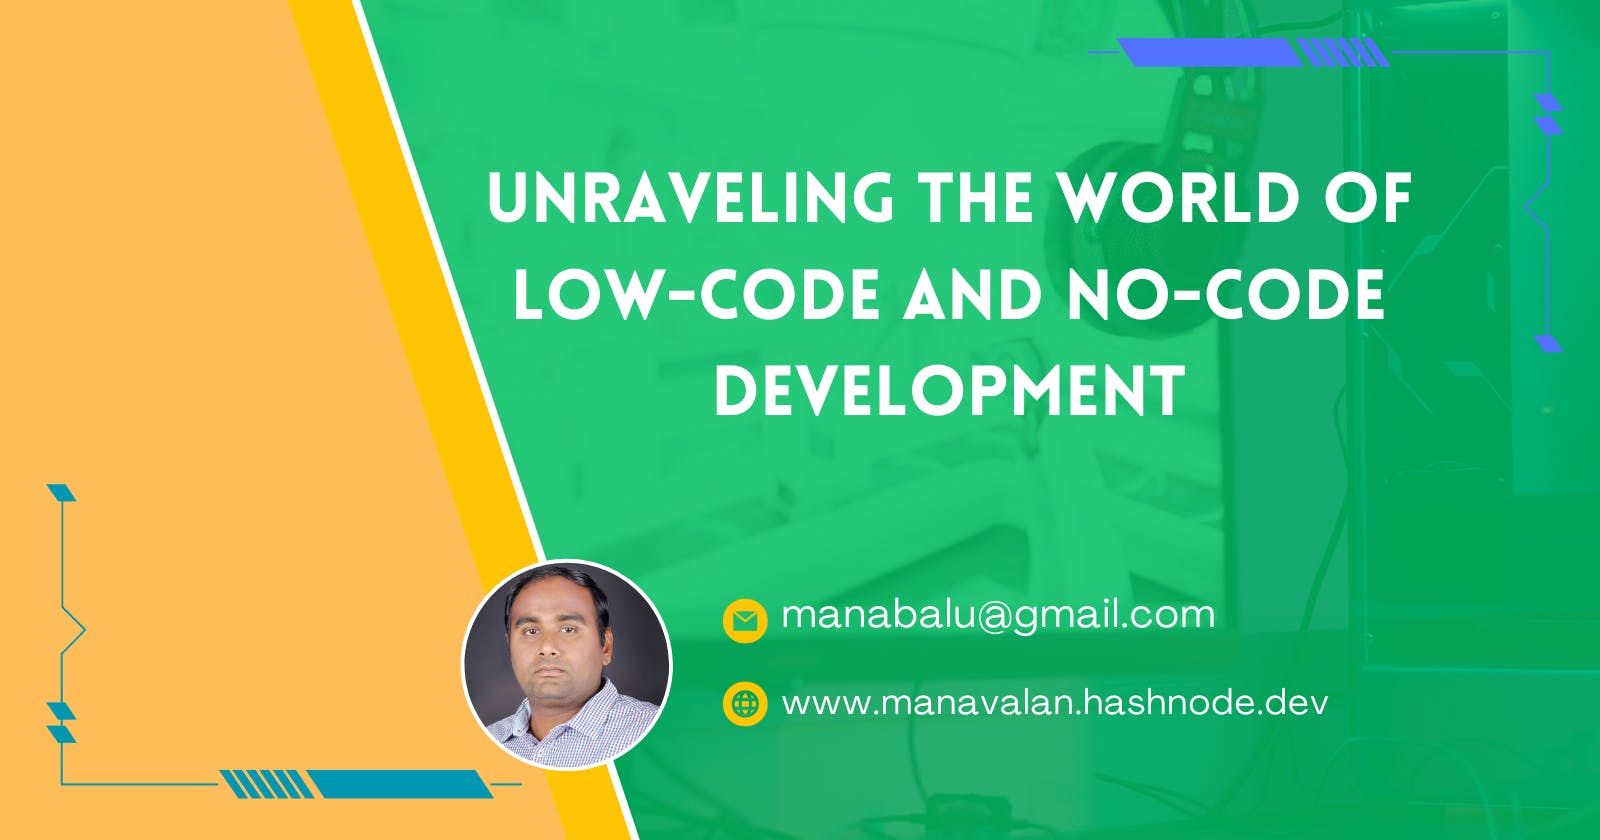 Unraveling the World of Low-Code and No-Code Development